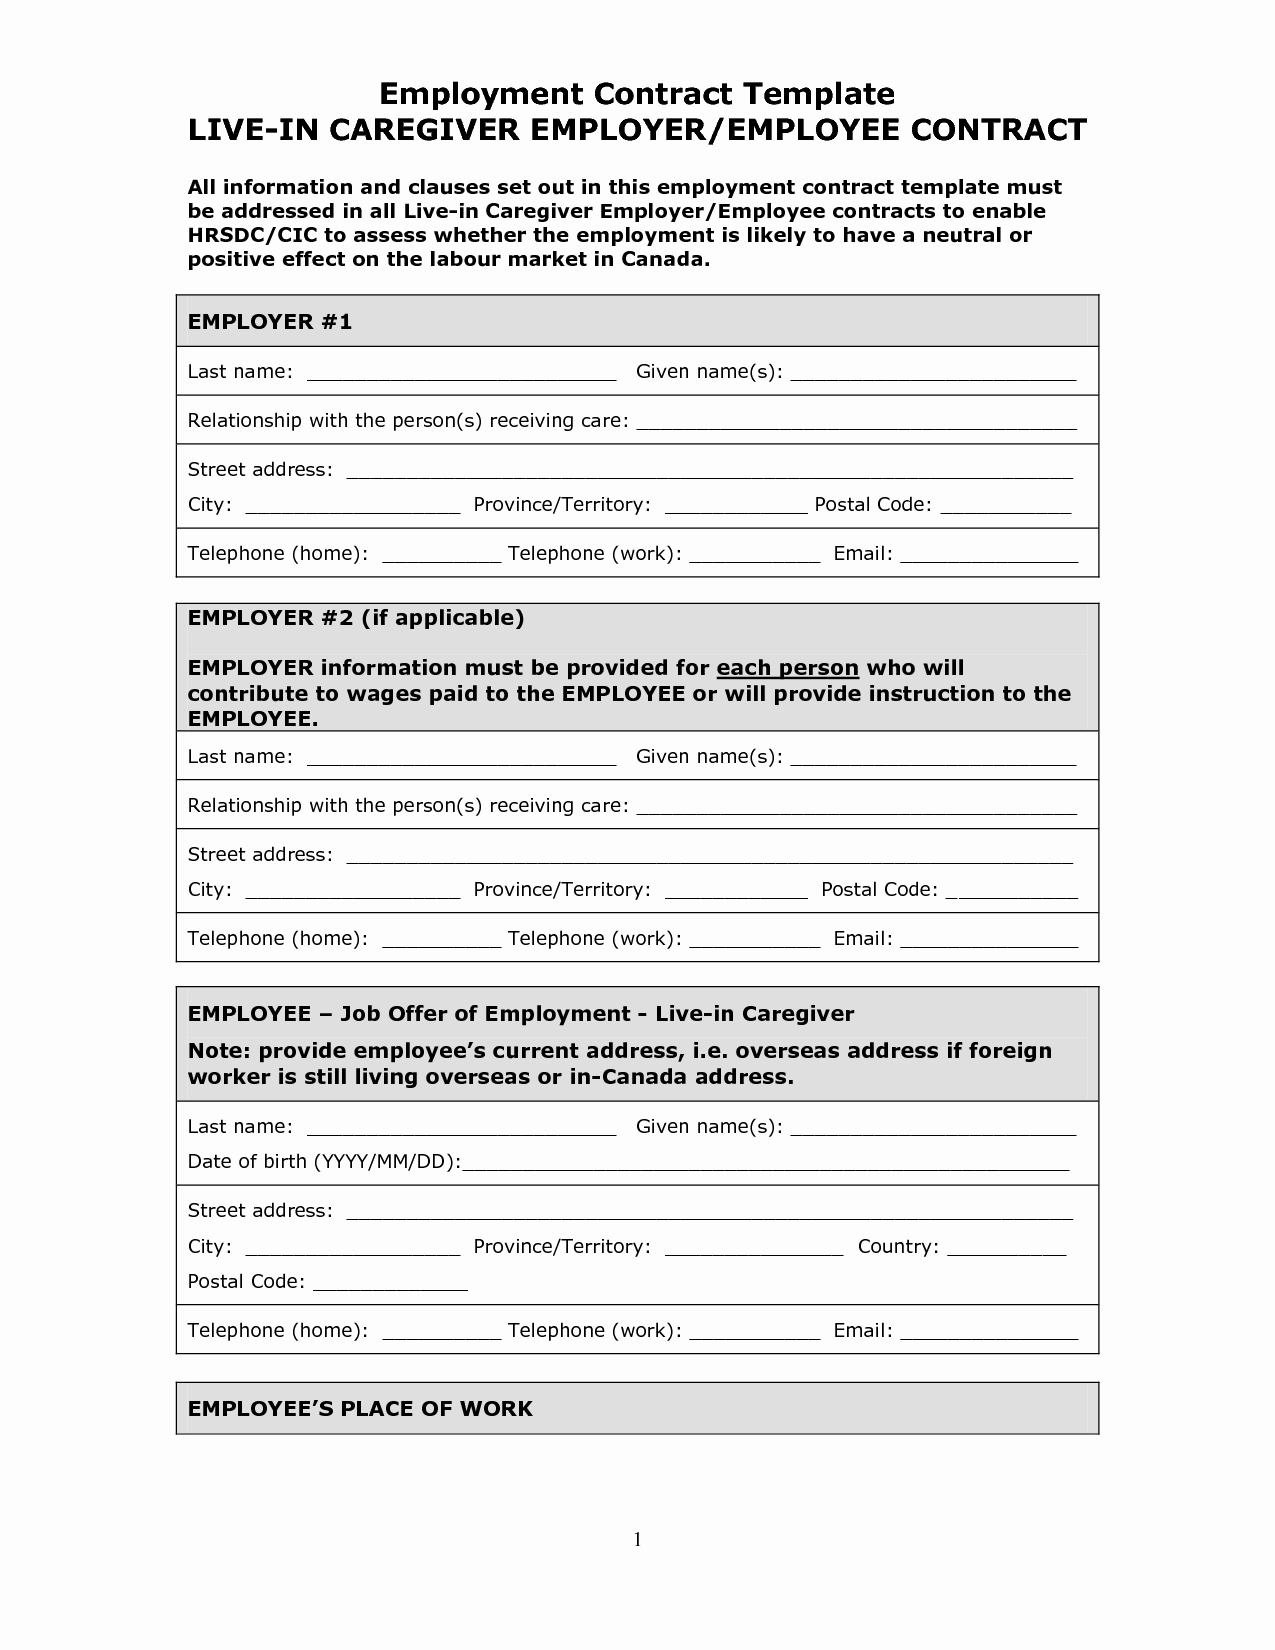 Employment Contract Template Word Awesome Employment Contract Template